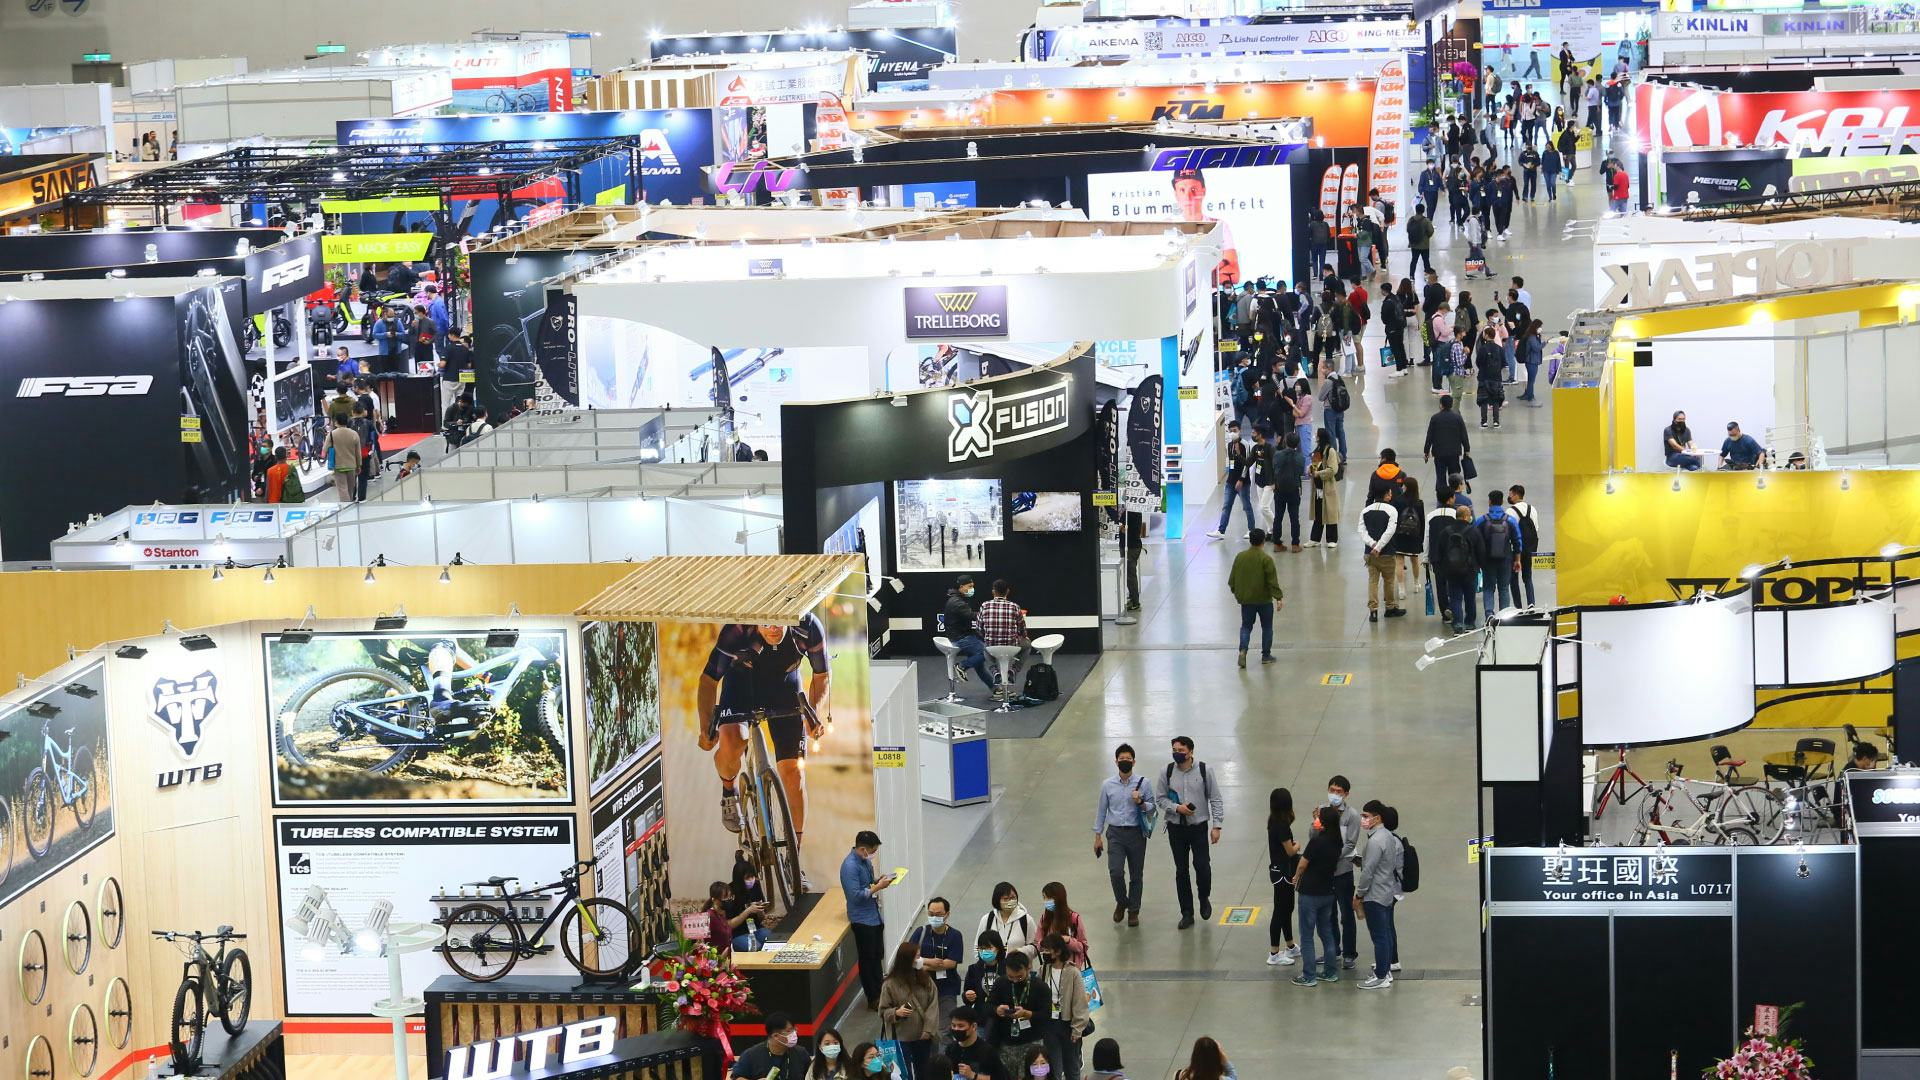 More than 770 exhibitors have signed up for Taipei Cycle 2023.